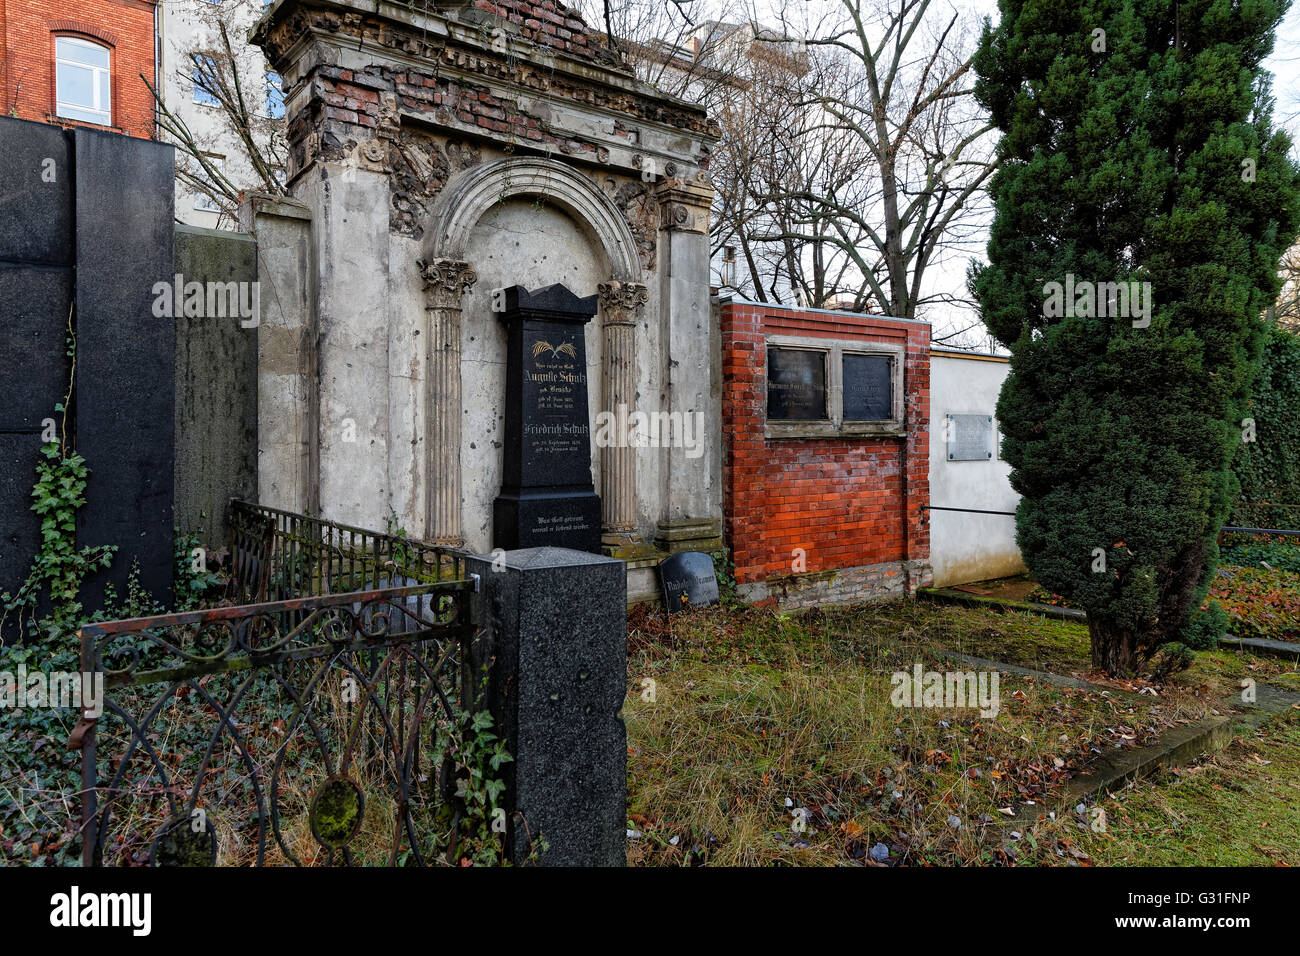 Berlin, Germany, grave stones of Cemeteries at Hallesches Tor Stock Photo